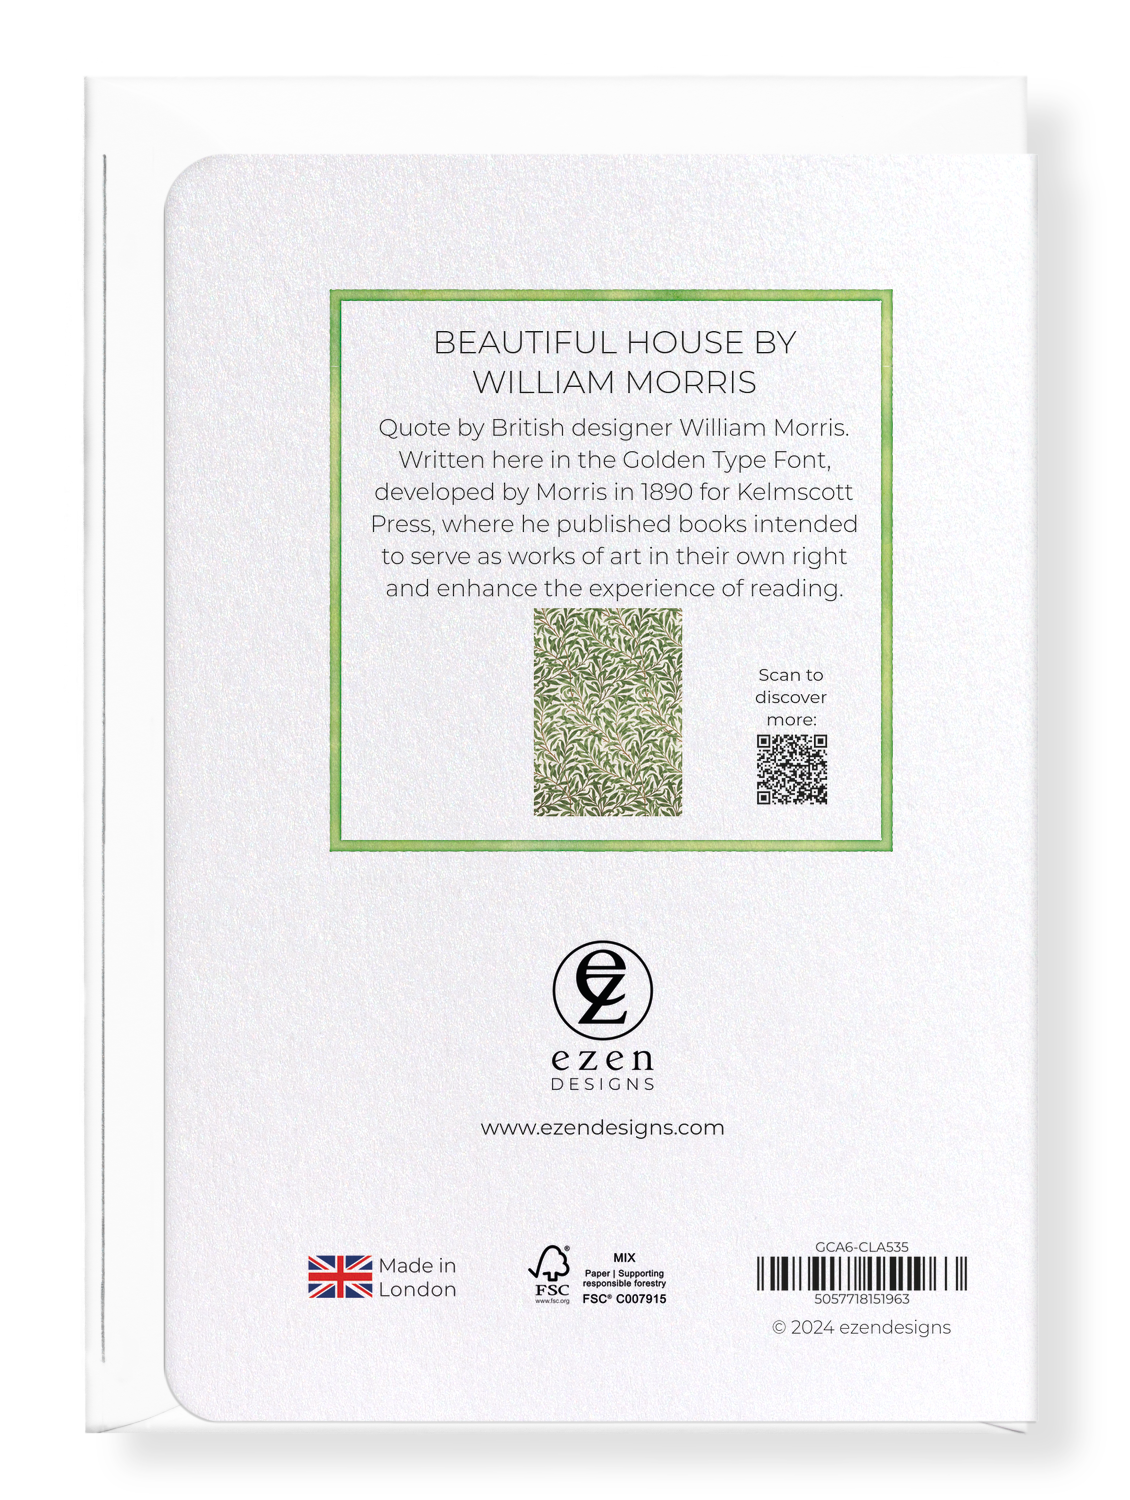 Ezen Designs - Beautiful House by William Morris - Greeting Card - Back